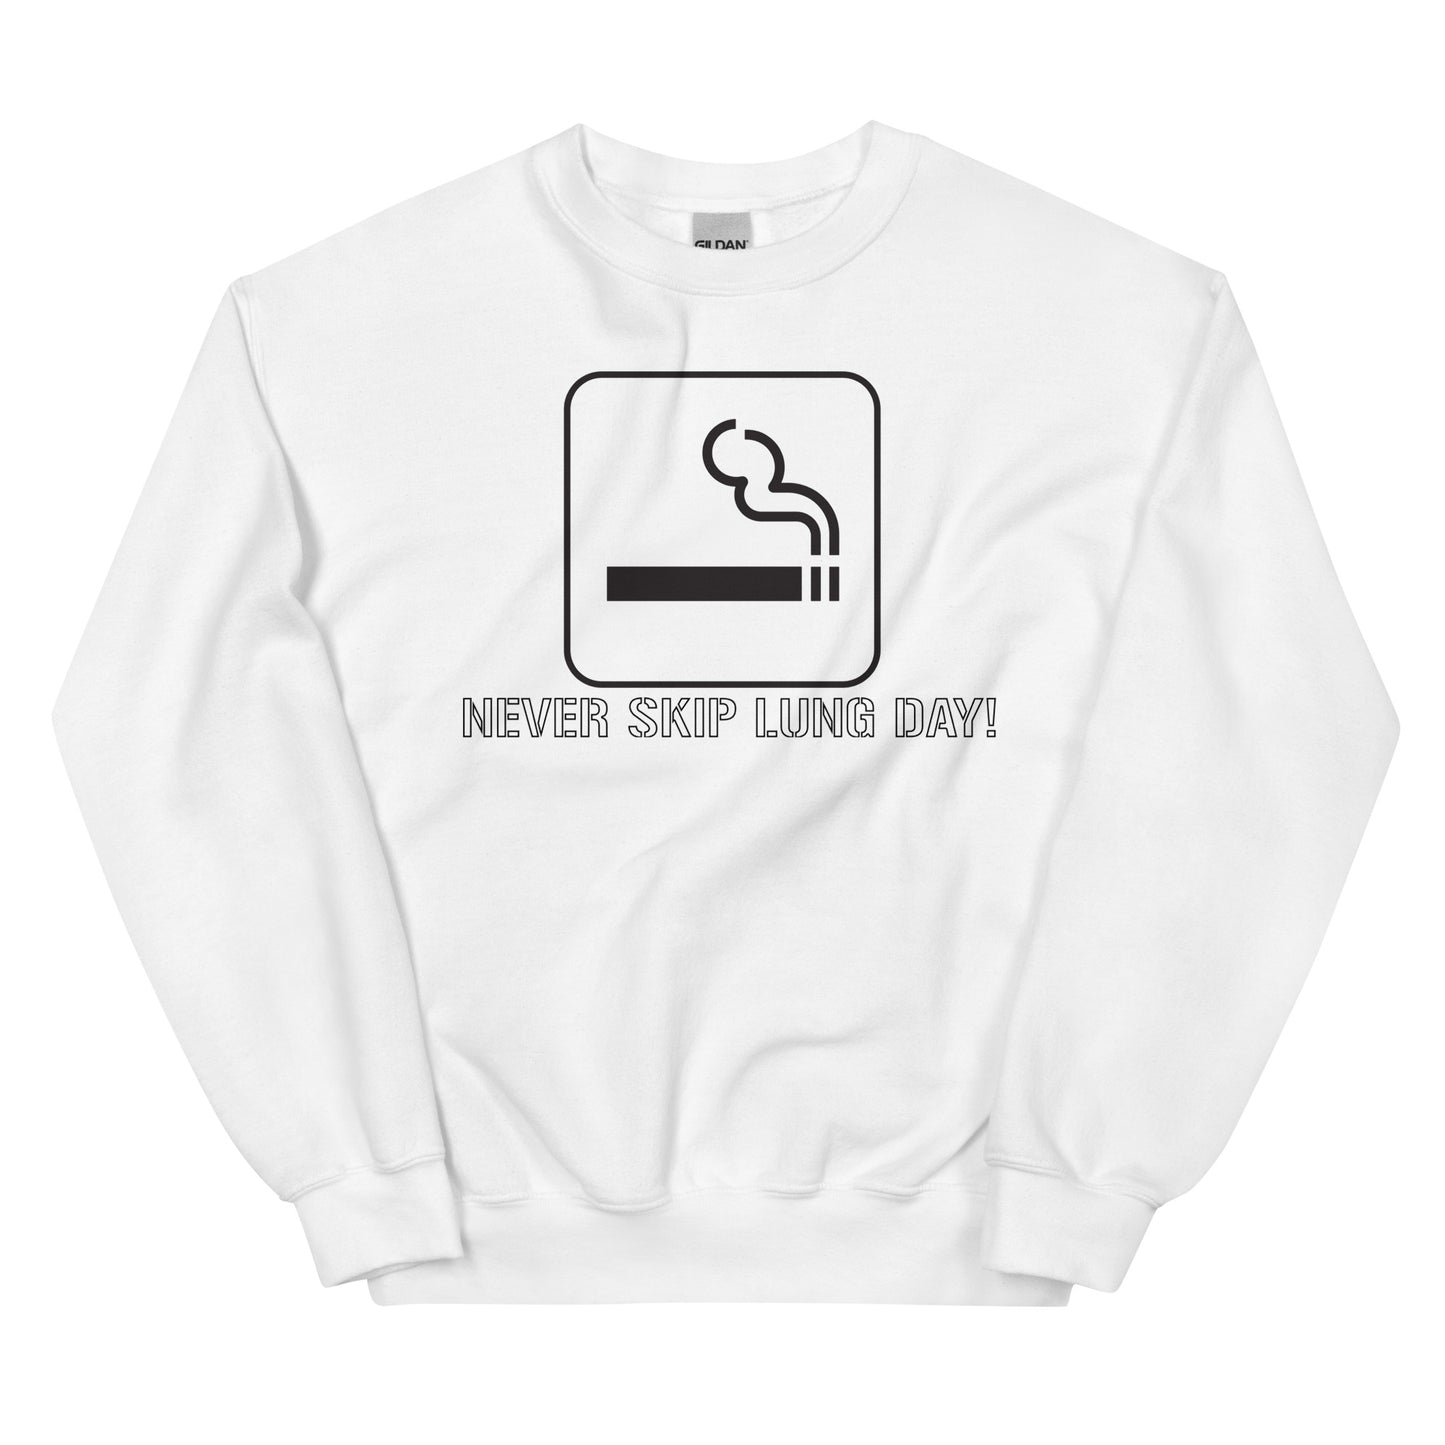 Never Skip Lung Day Crewneck